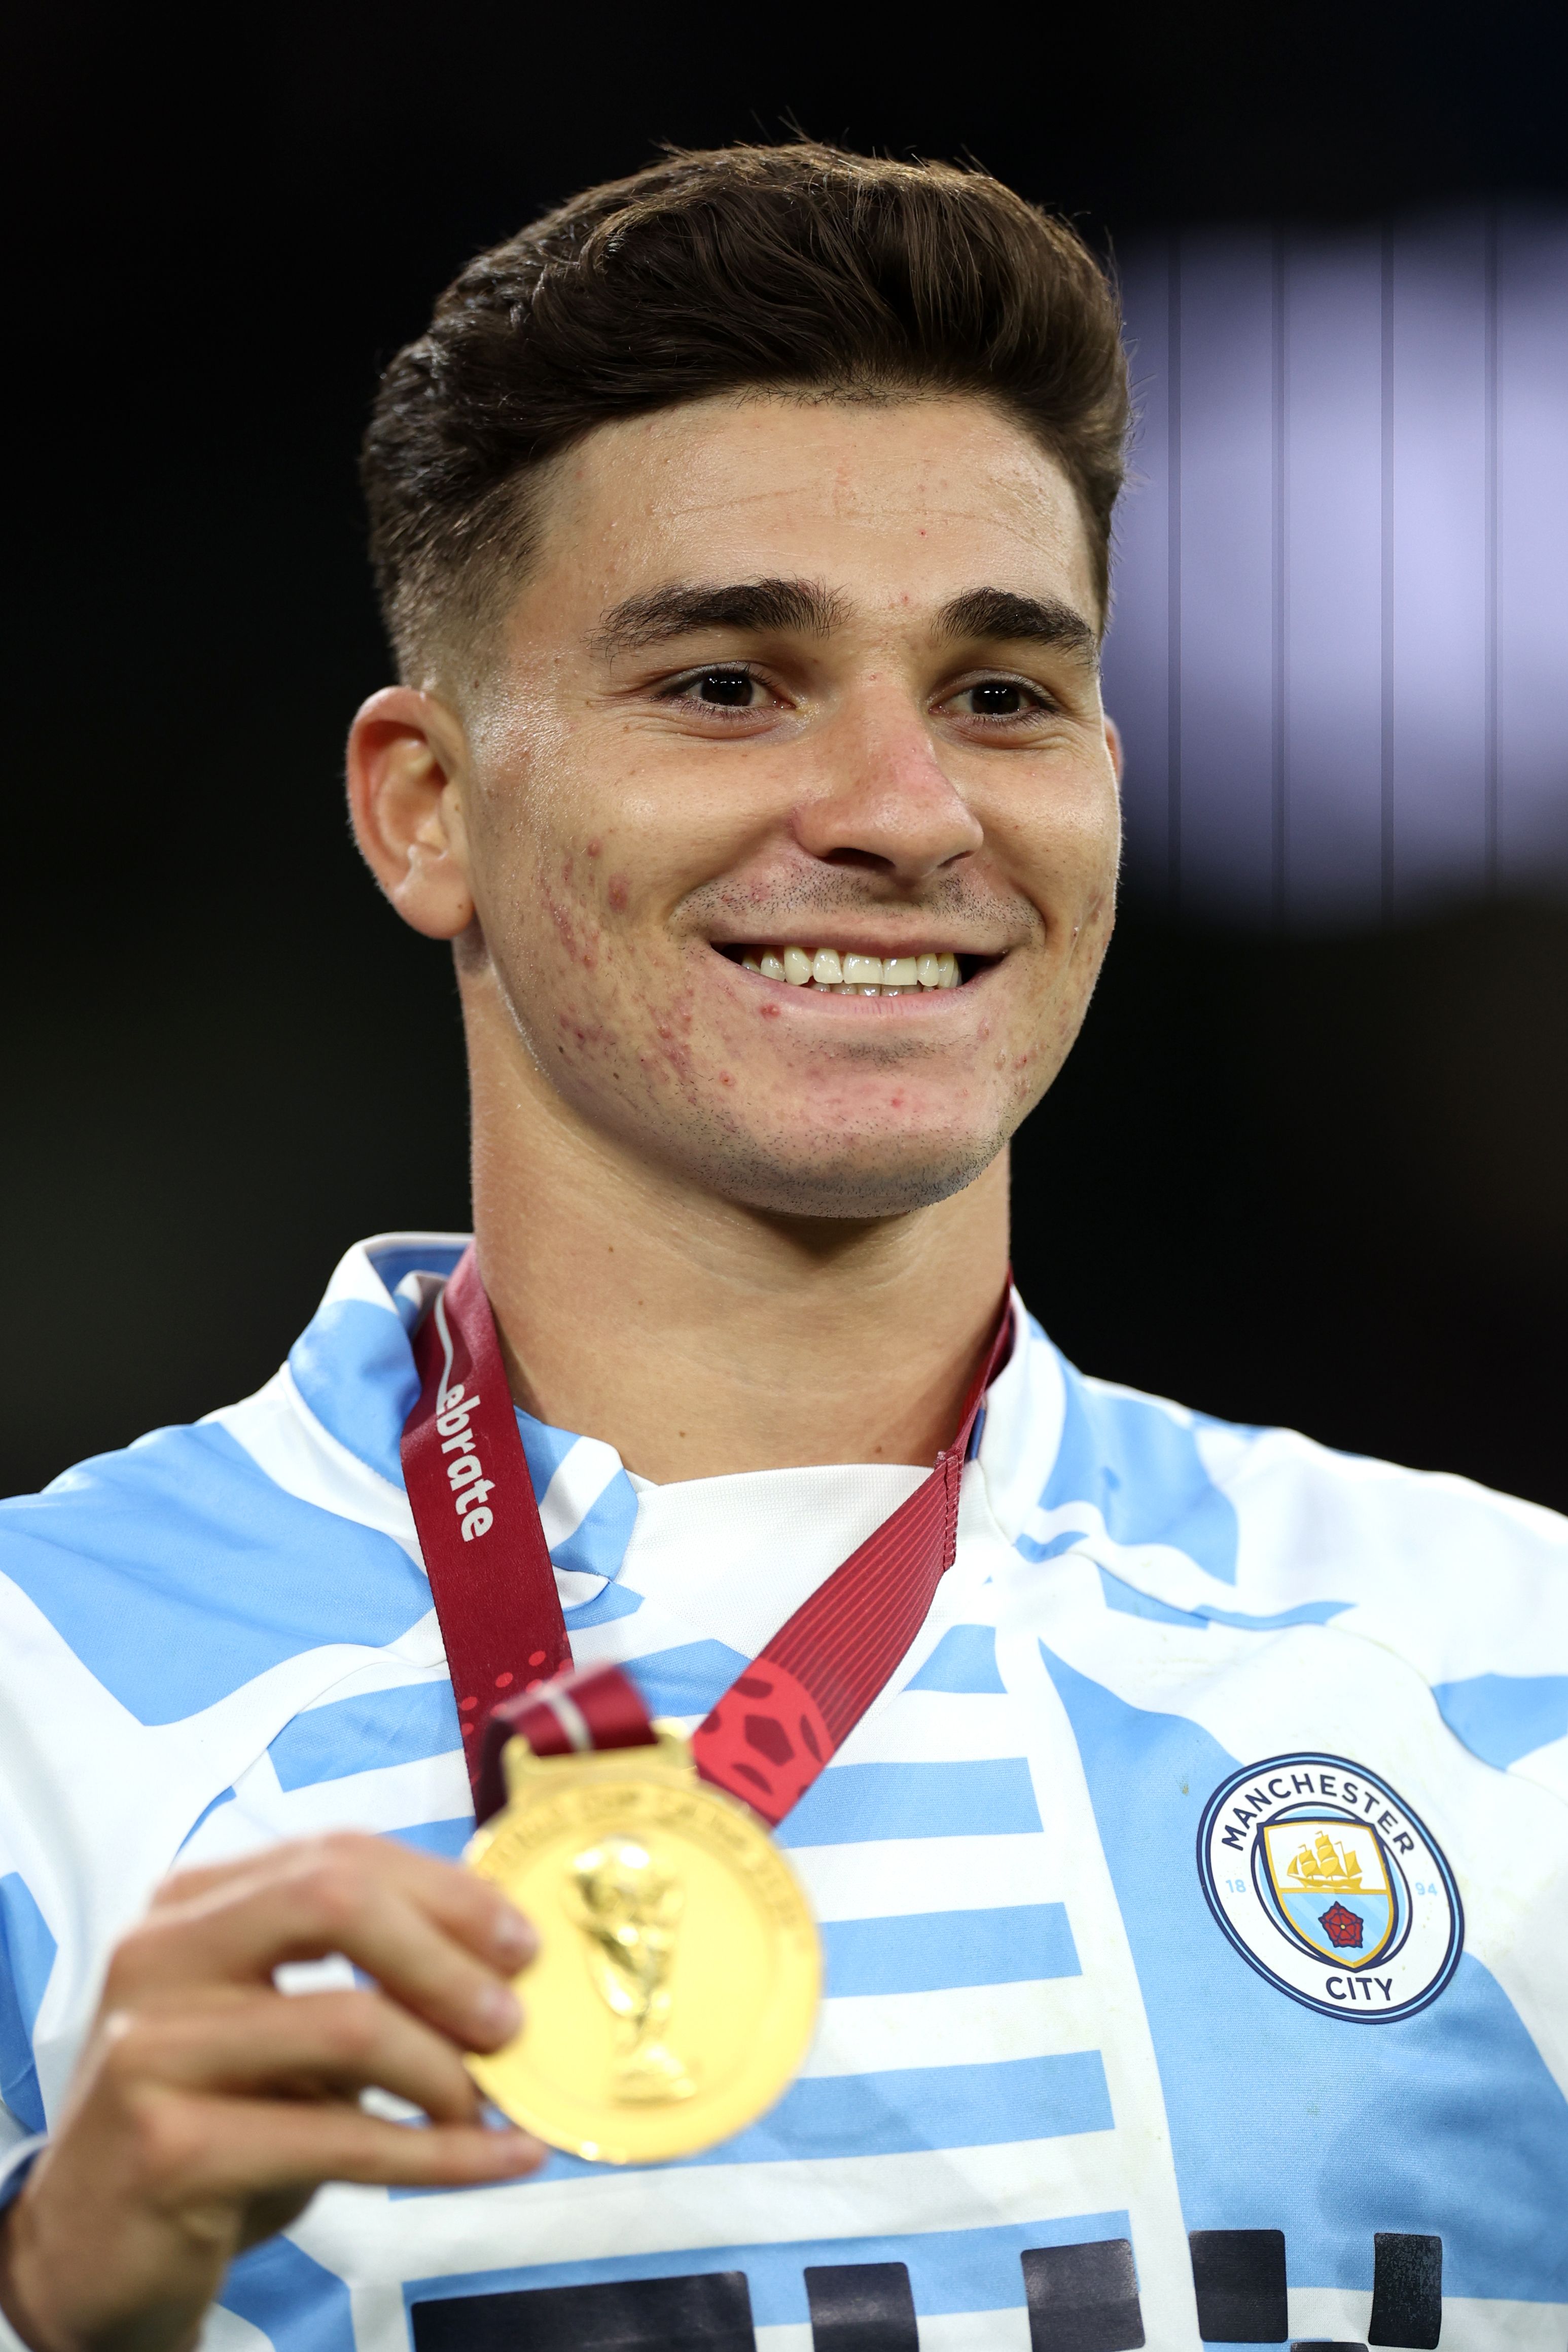 Alvarez holds up his World Cup medal.